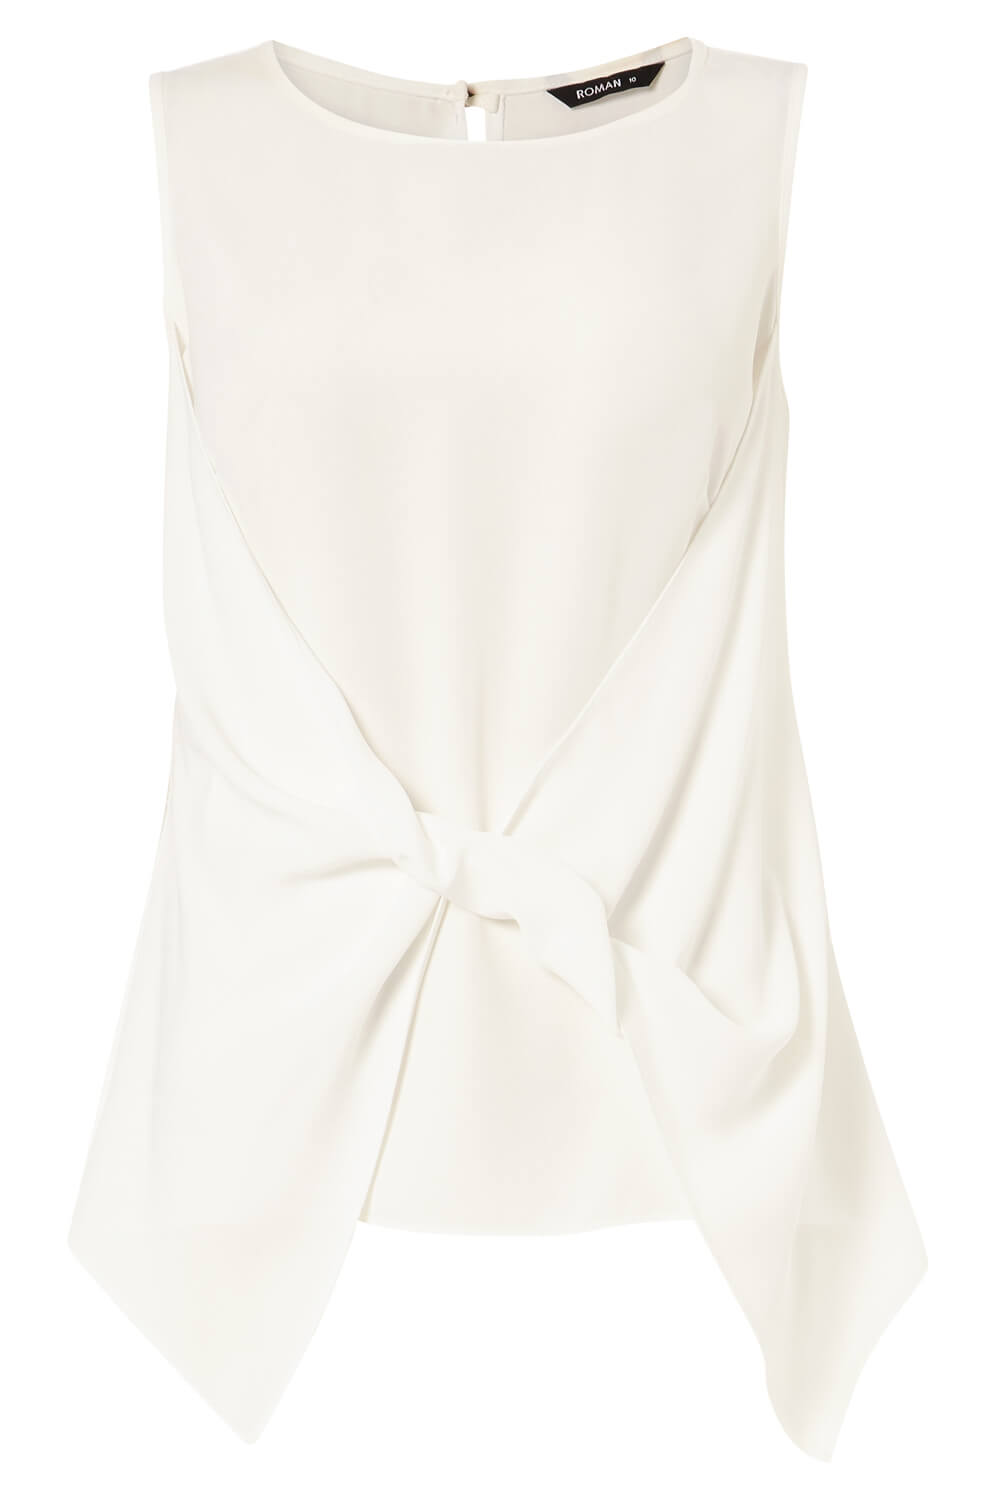 Ivory  Sleeveless Twist Front Top, Image 5 of 5